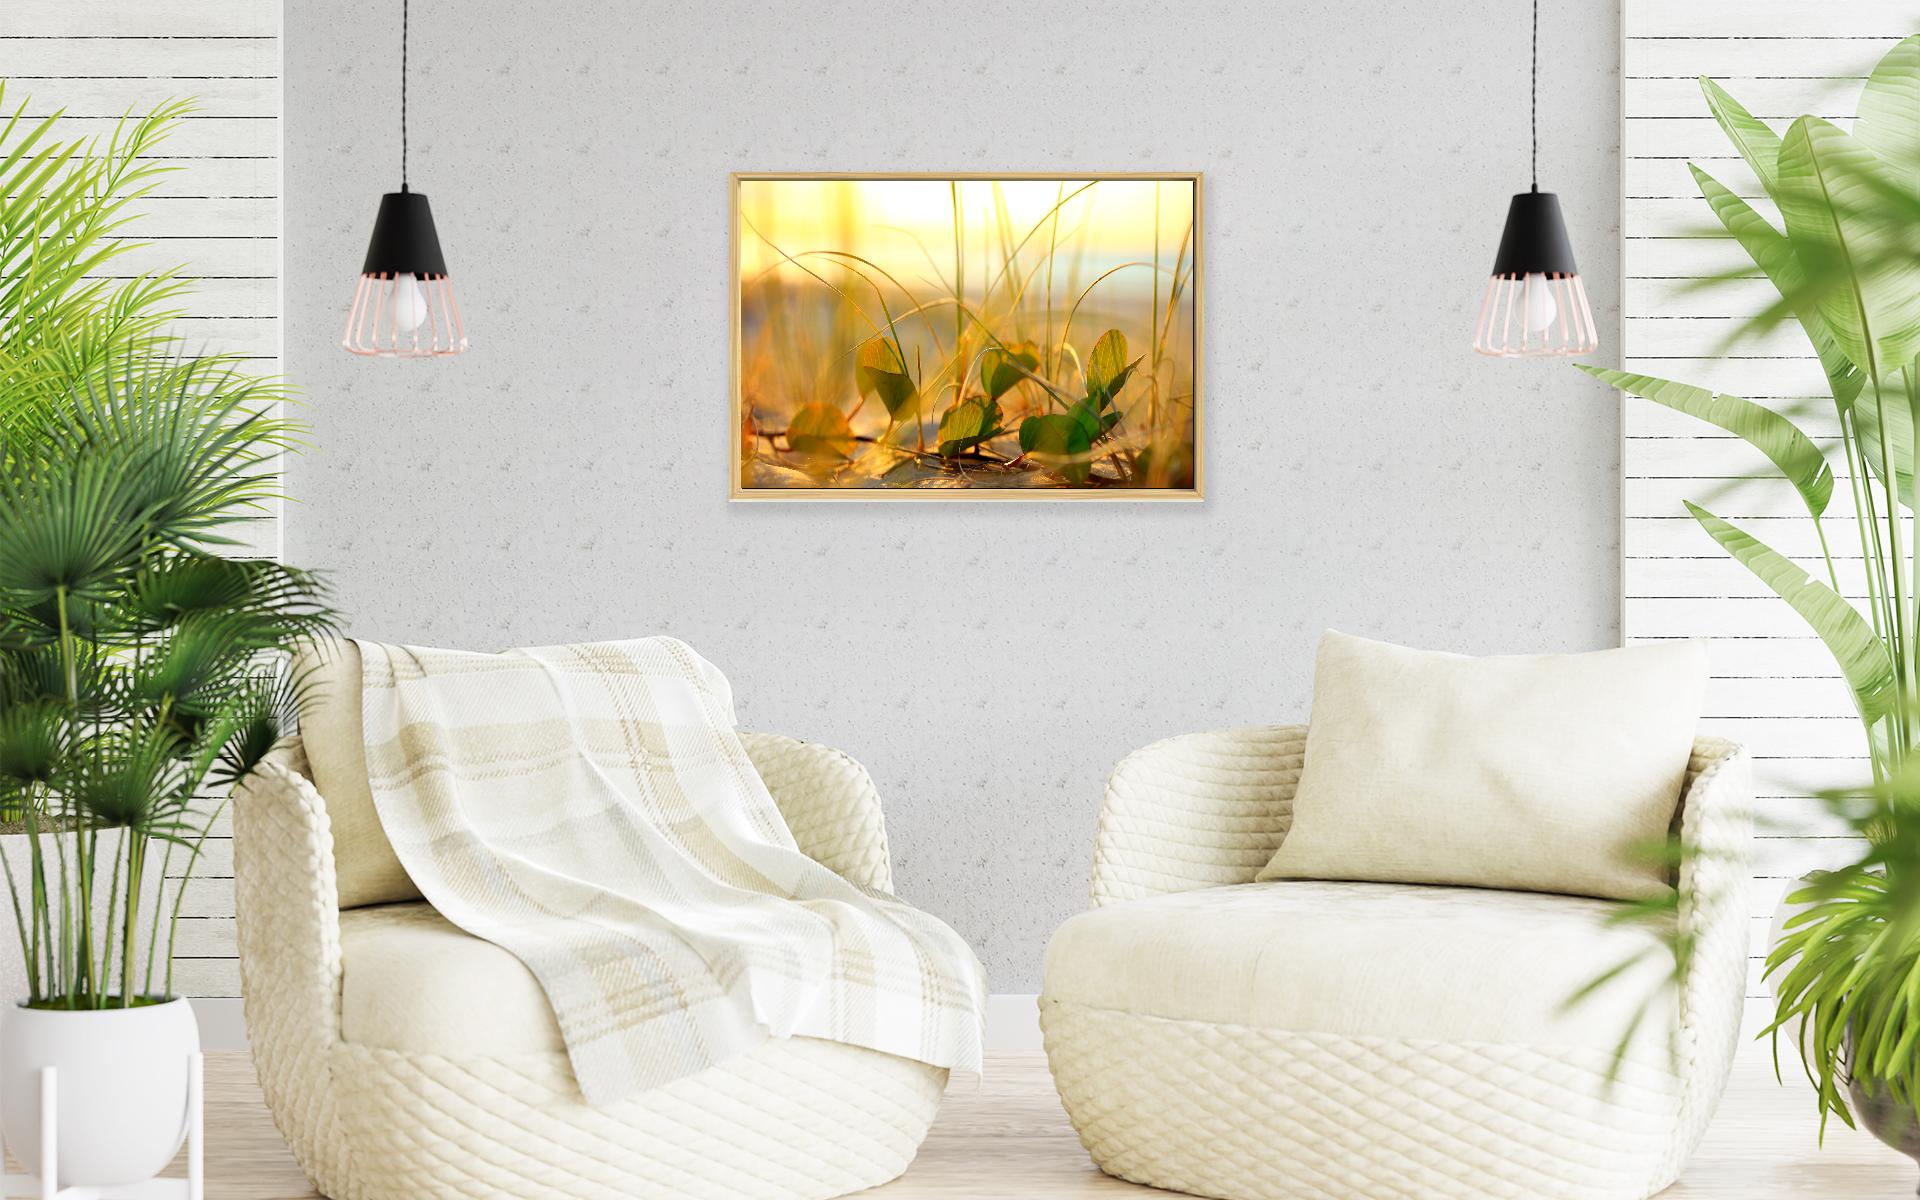 Image 19 - Seagrass-frame-4